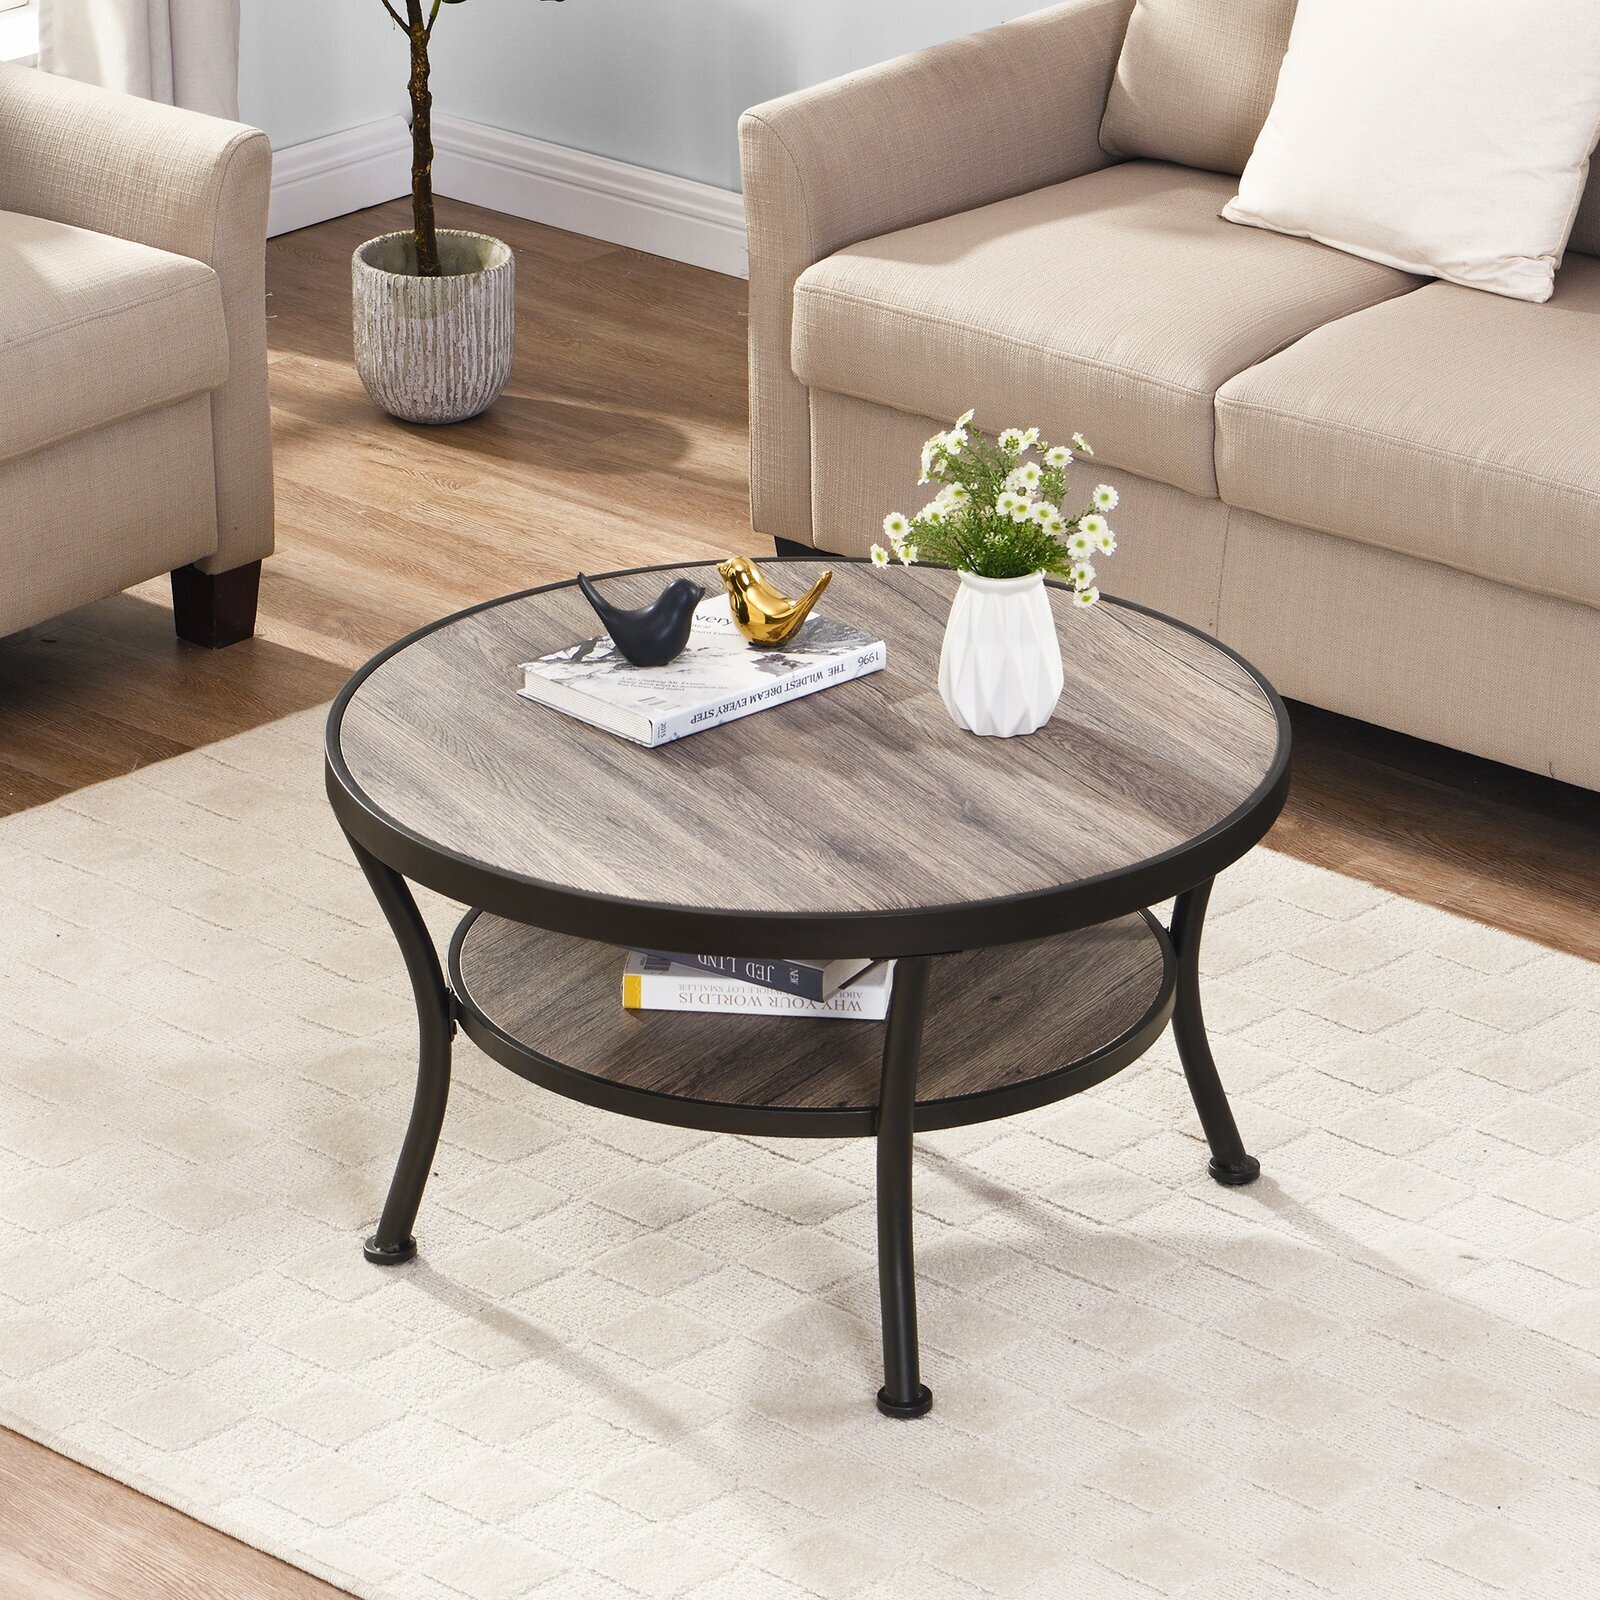 Two tier, round coffee table